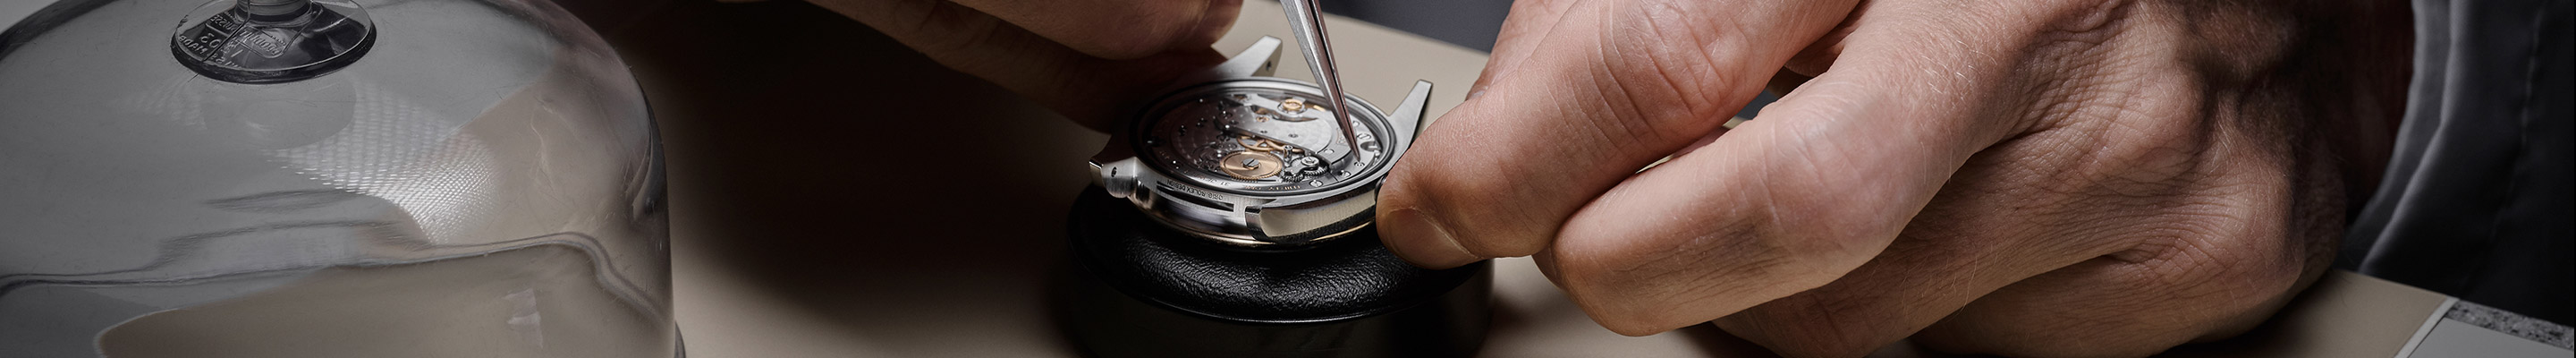 ROLEX WATCH SERVICING AND REPAIR AT ROLEX BOUTIQUE GEARYS CENTURY CITY